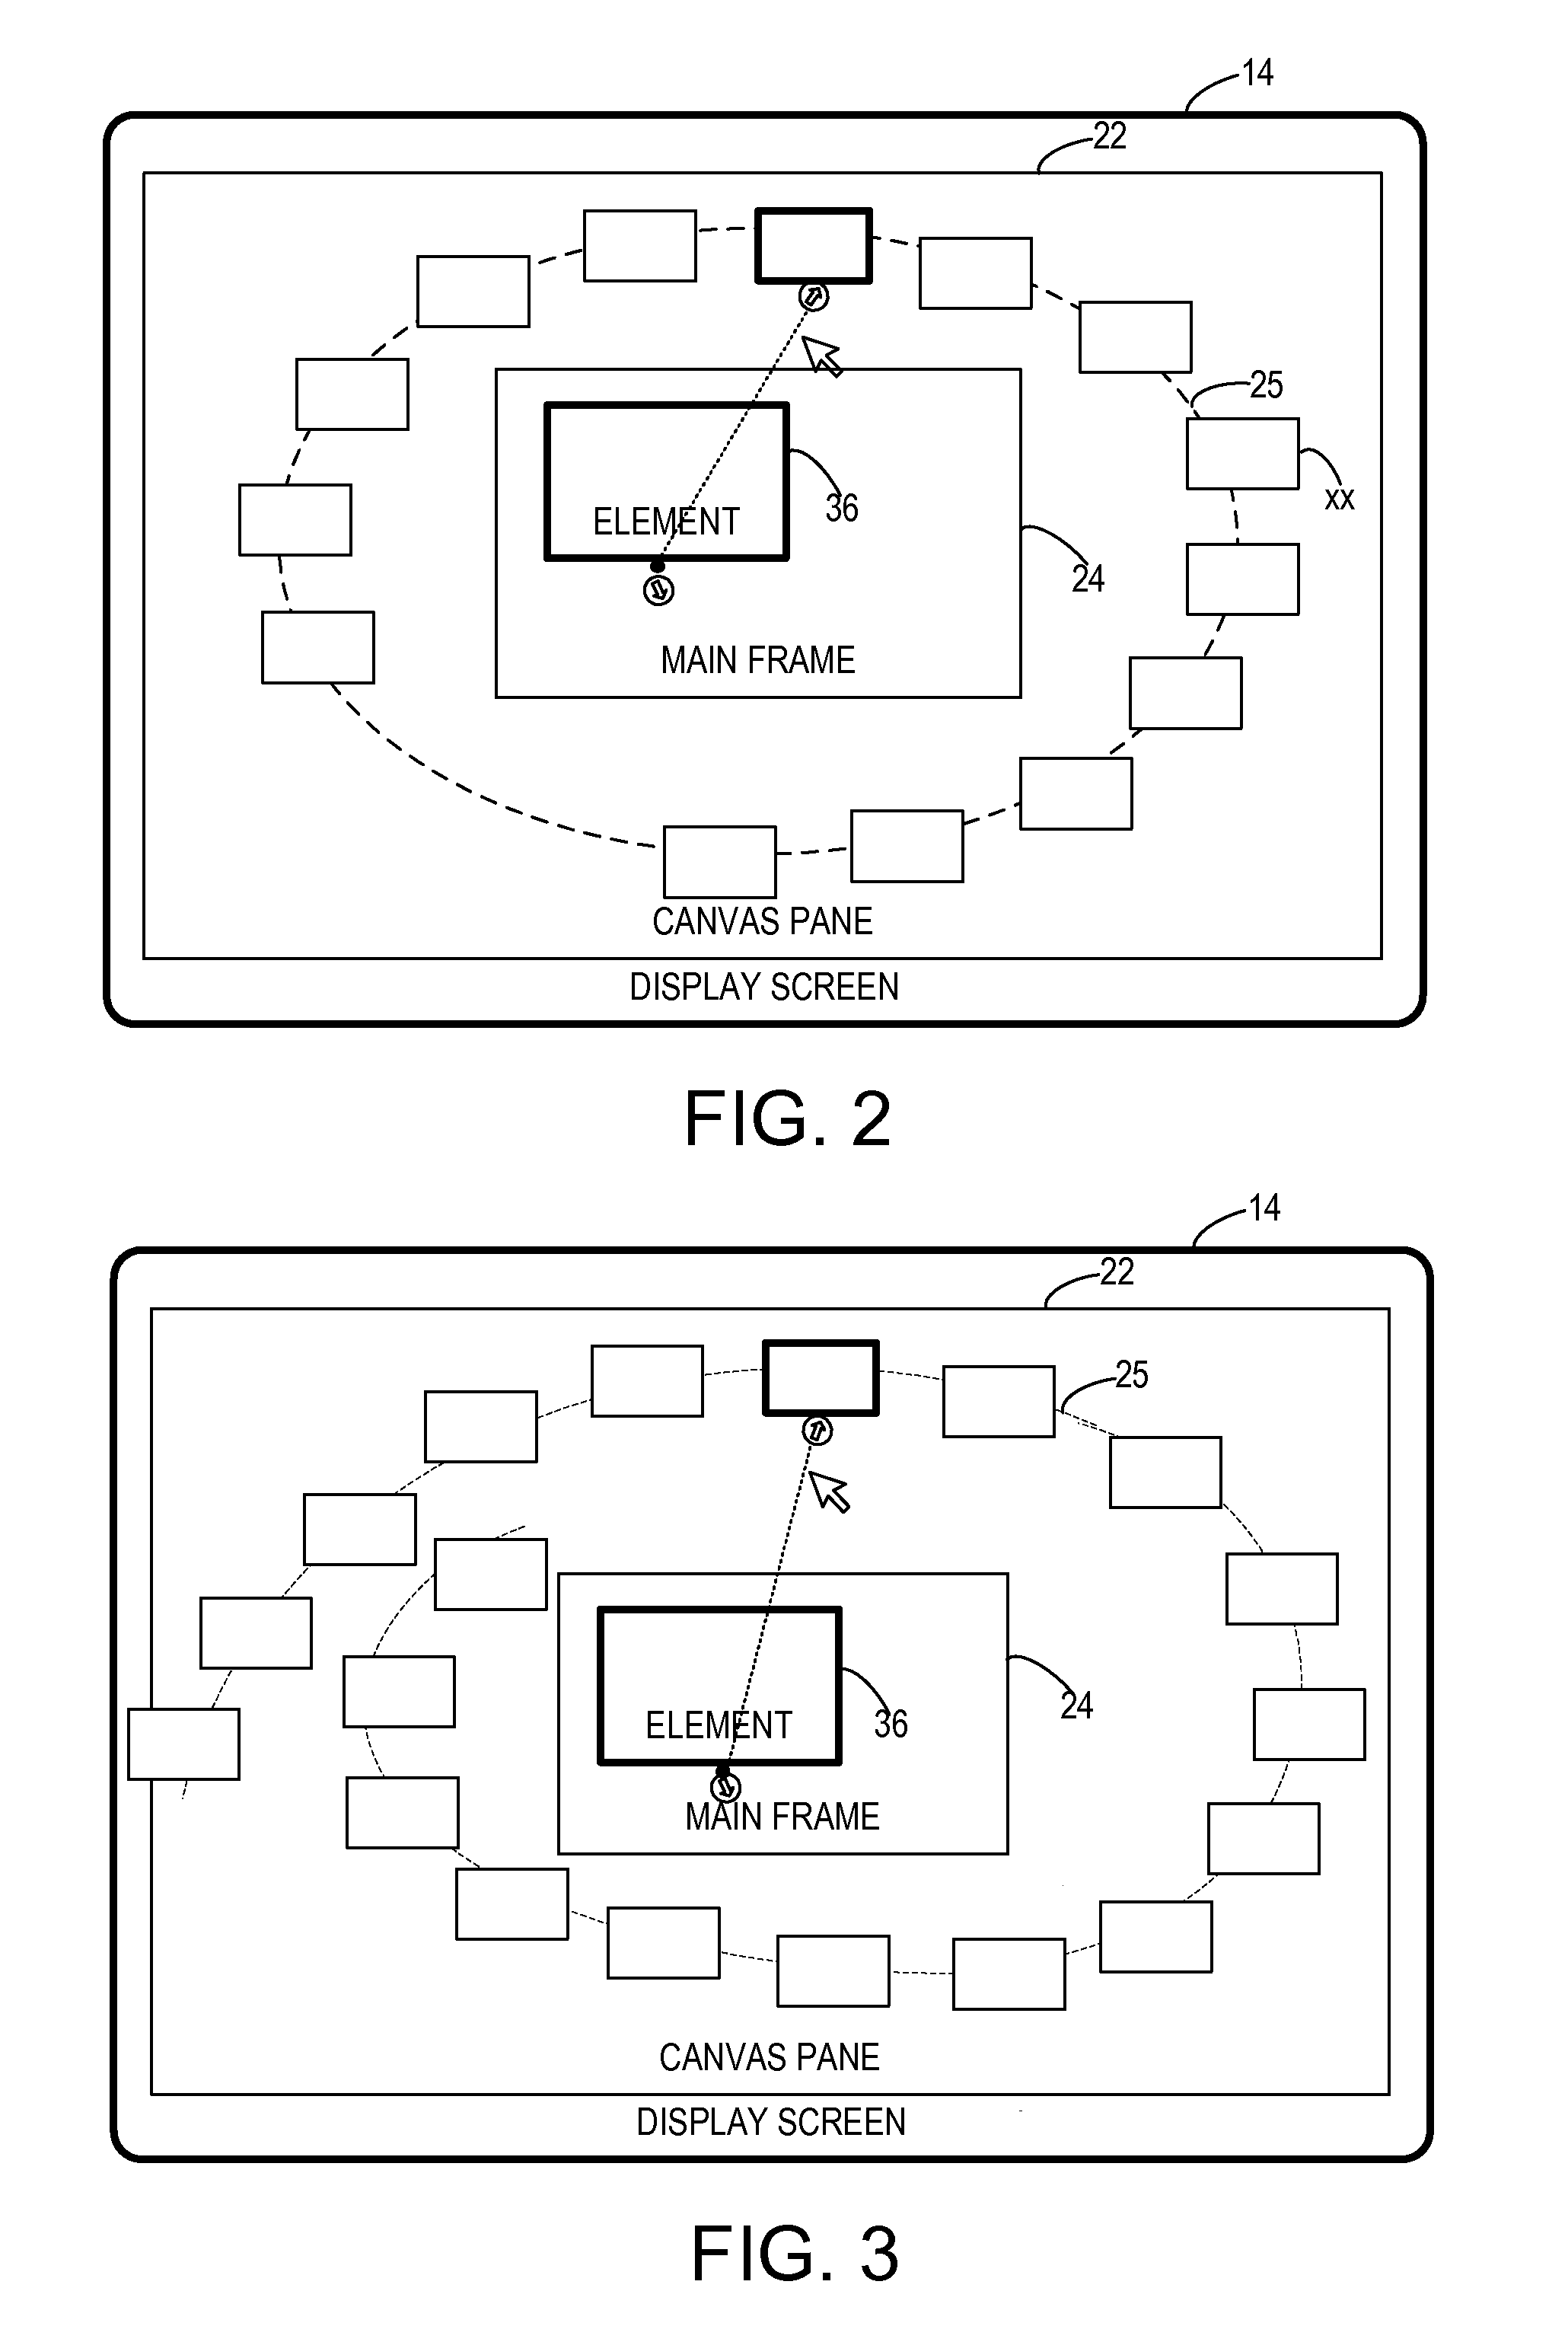 Graphical user interface for multi-frame presentation